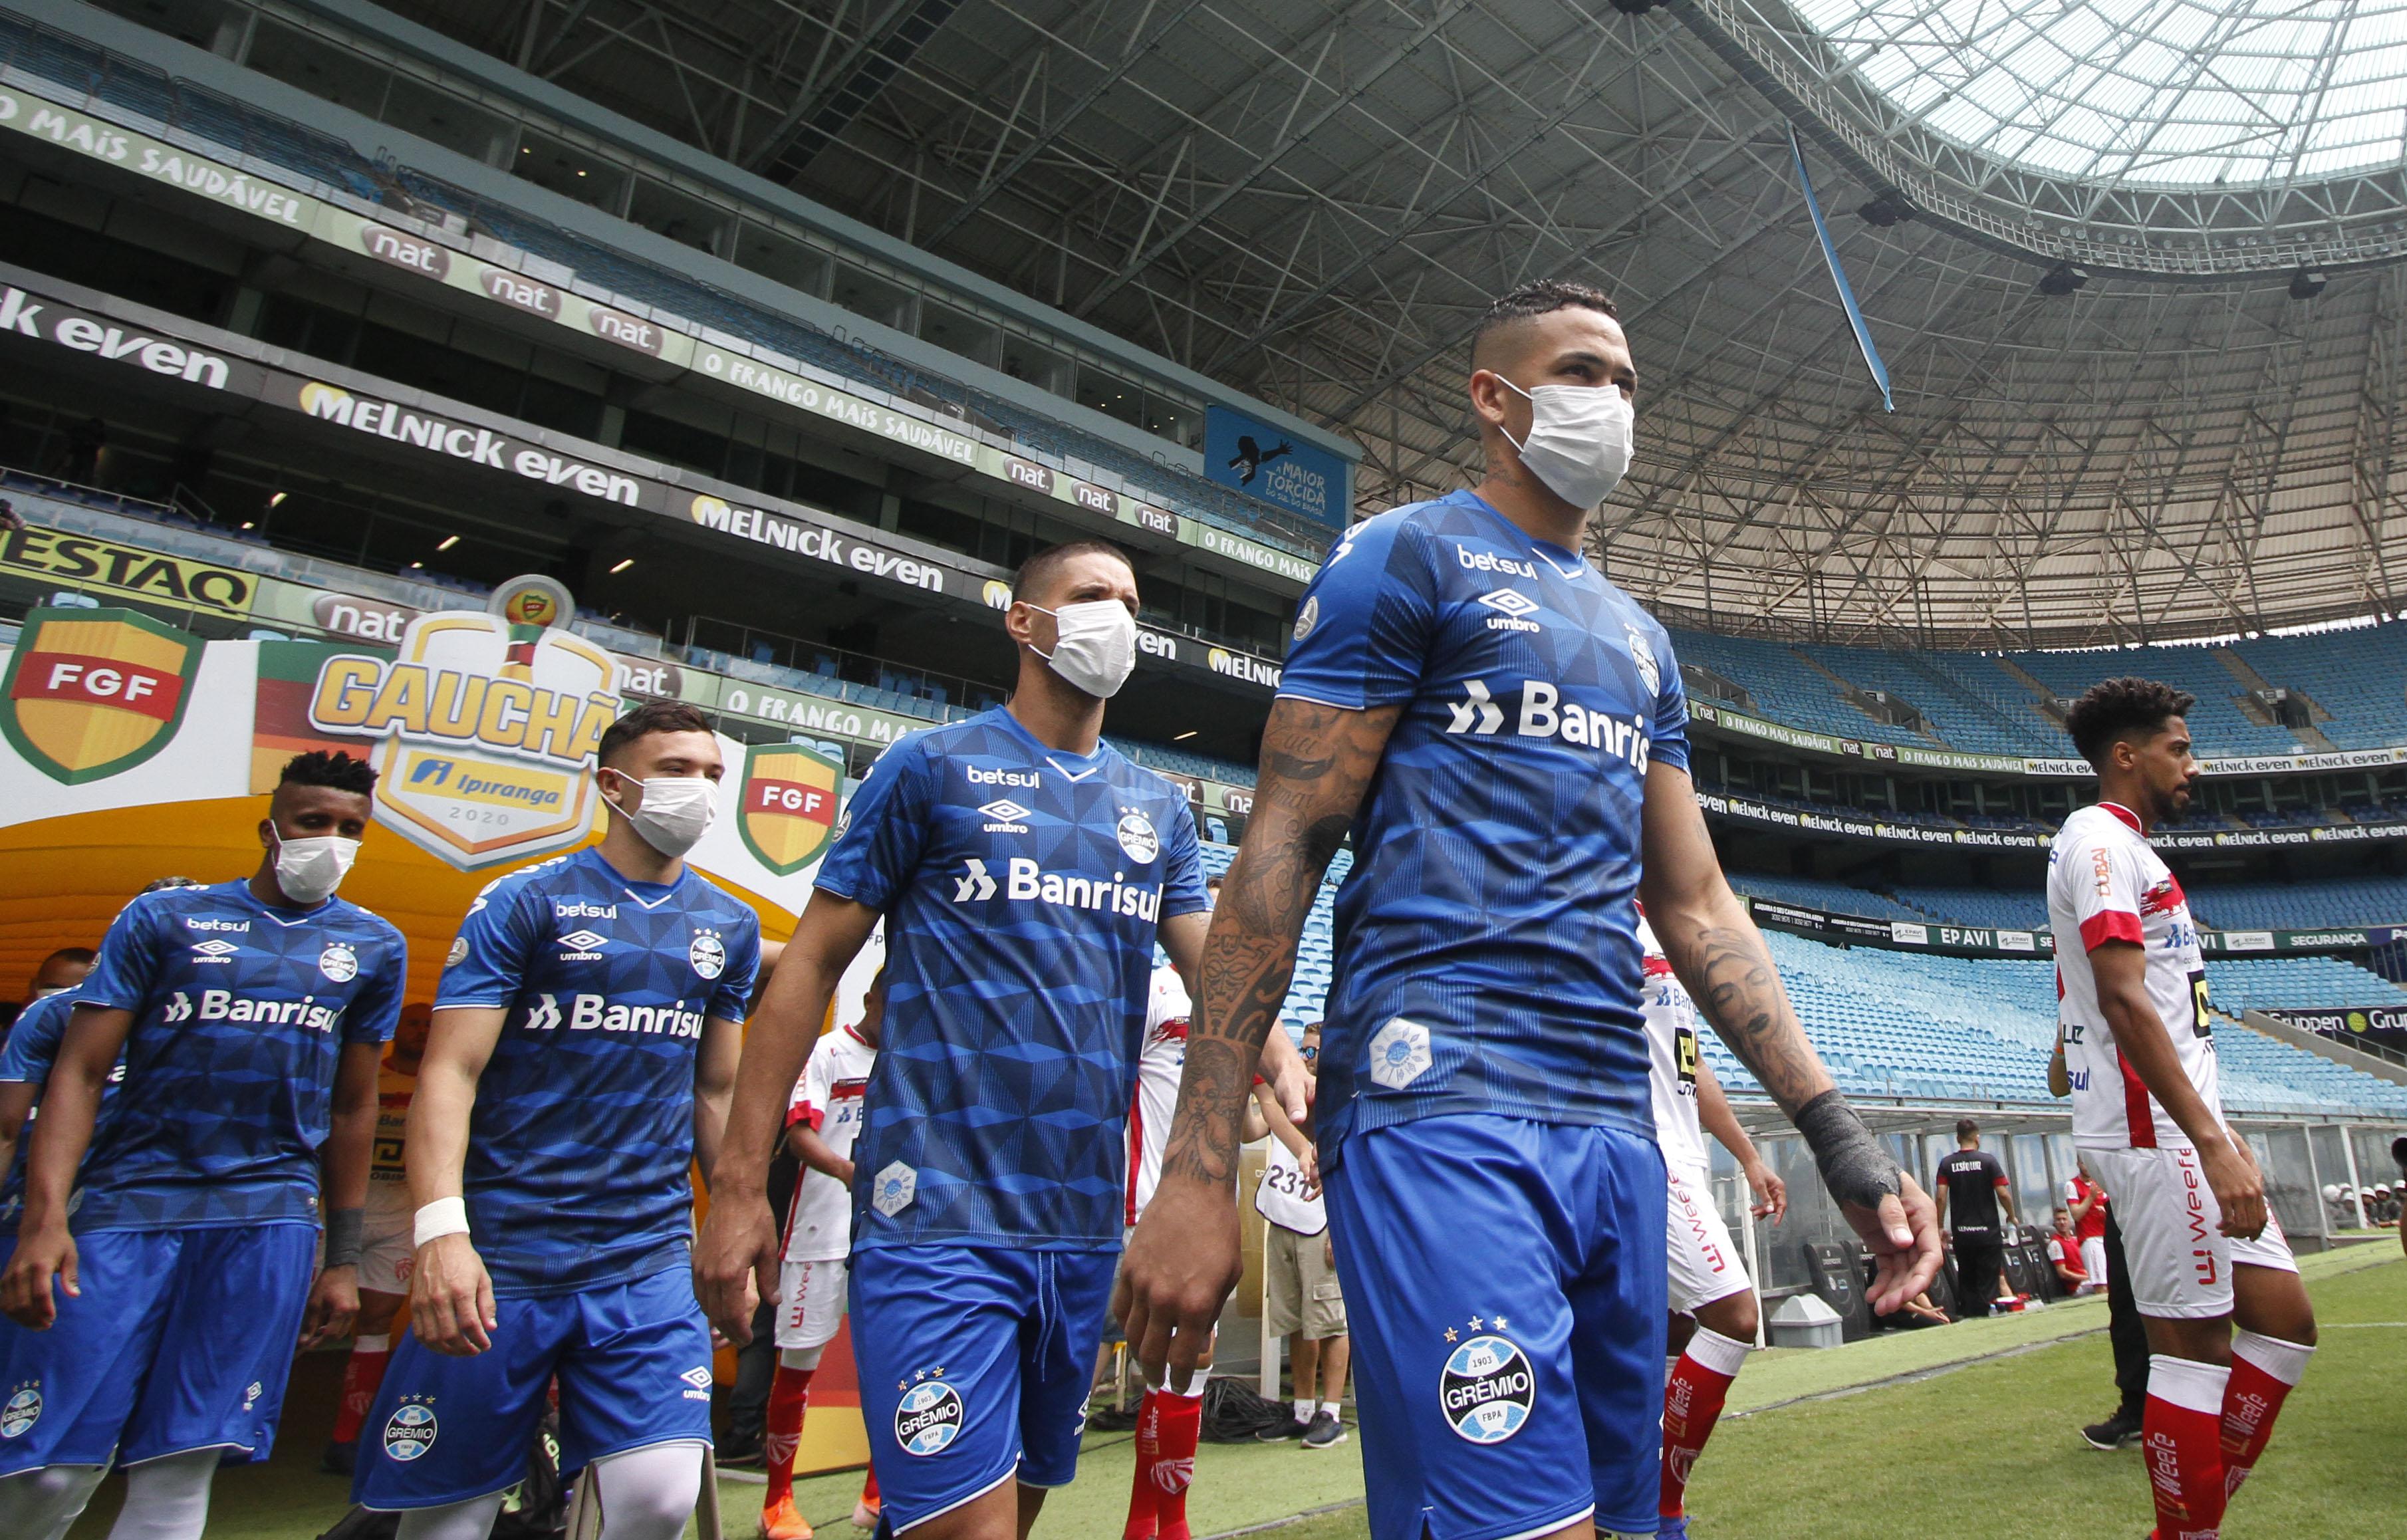 Players of Gremio enter the field wearing protective face masks to prevent the spread of the new Coronavirus, before the match against Sao Luiz, at the closed-doors Arena do Gremio stadium, in Porto Alegre, Brazil, on March 15, 2020.(Photo by Richard DUC)